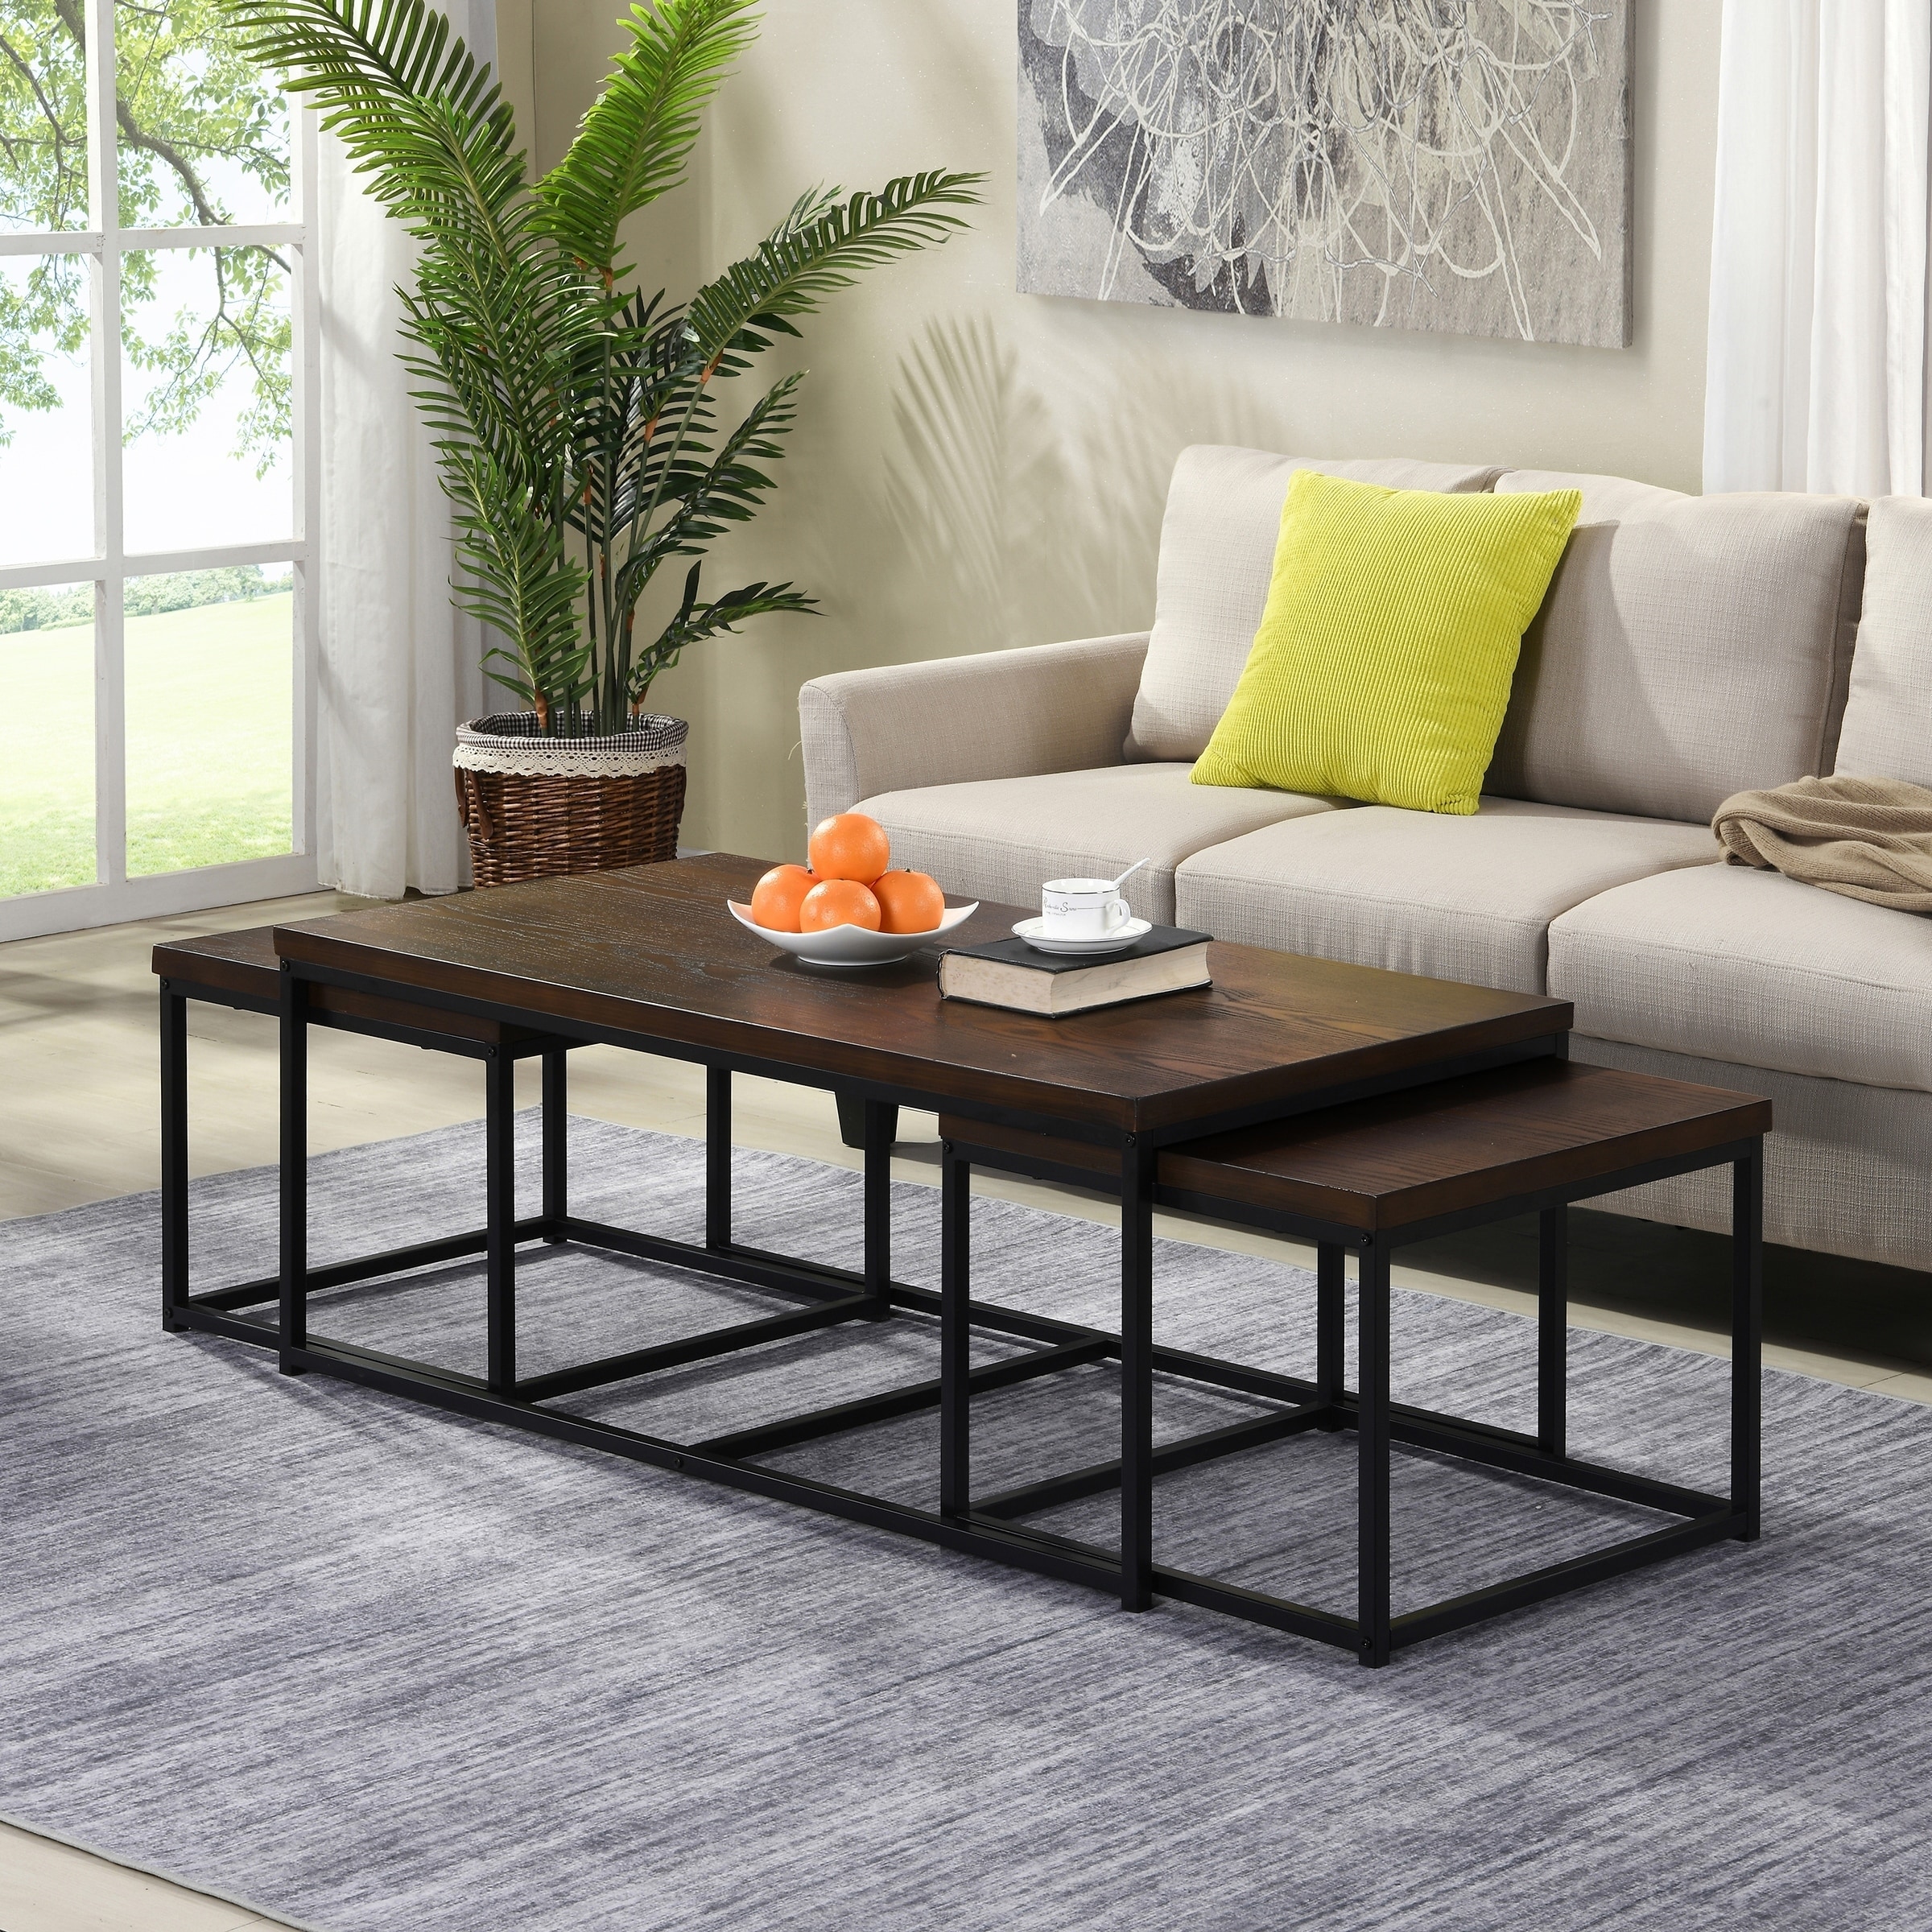 Carbon Loft Demchak Black 3 Piece Coffee Table And Side Table Set Overstock 30542987